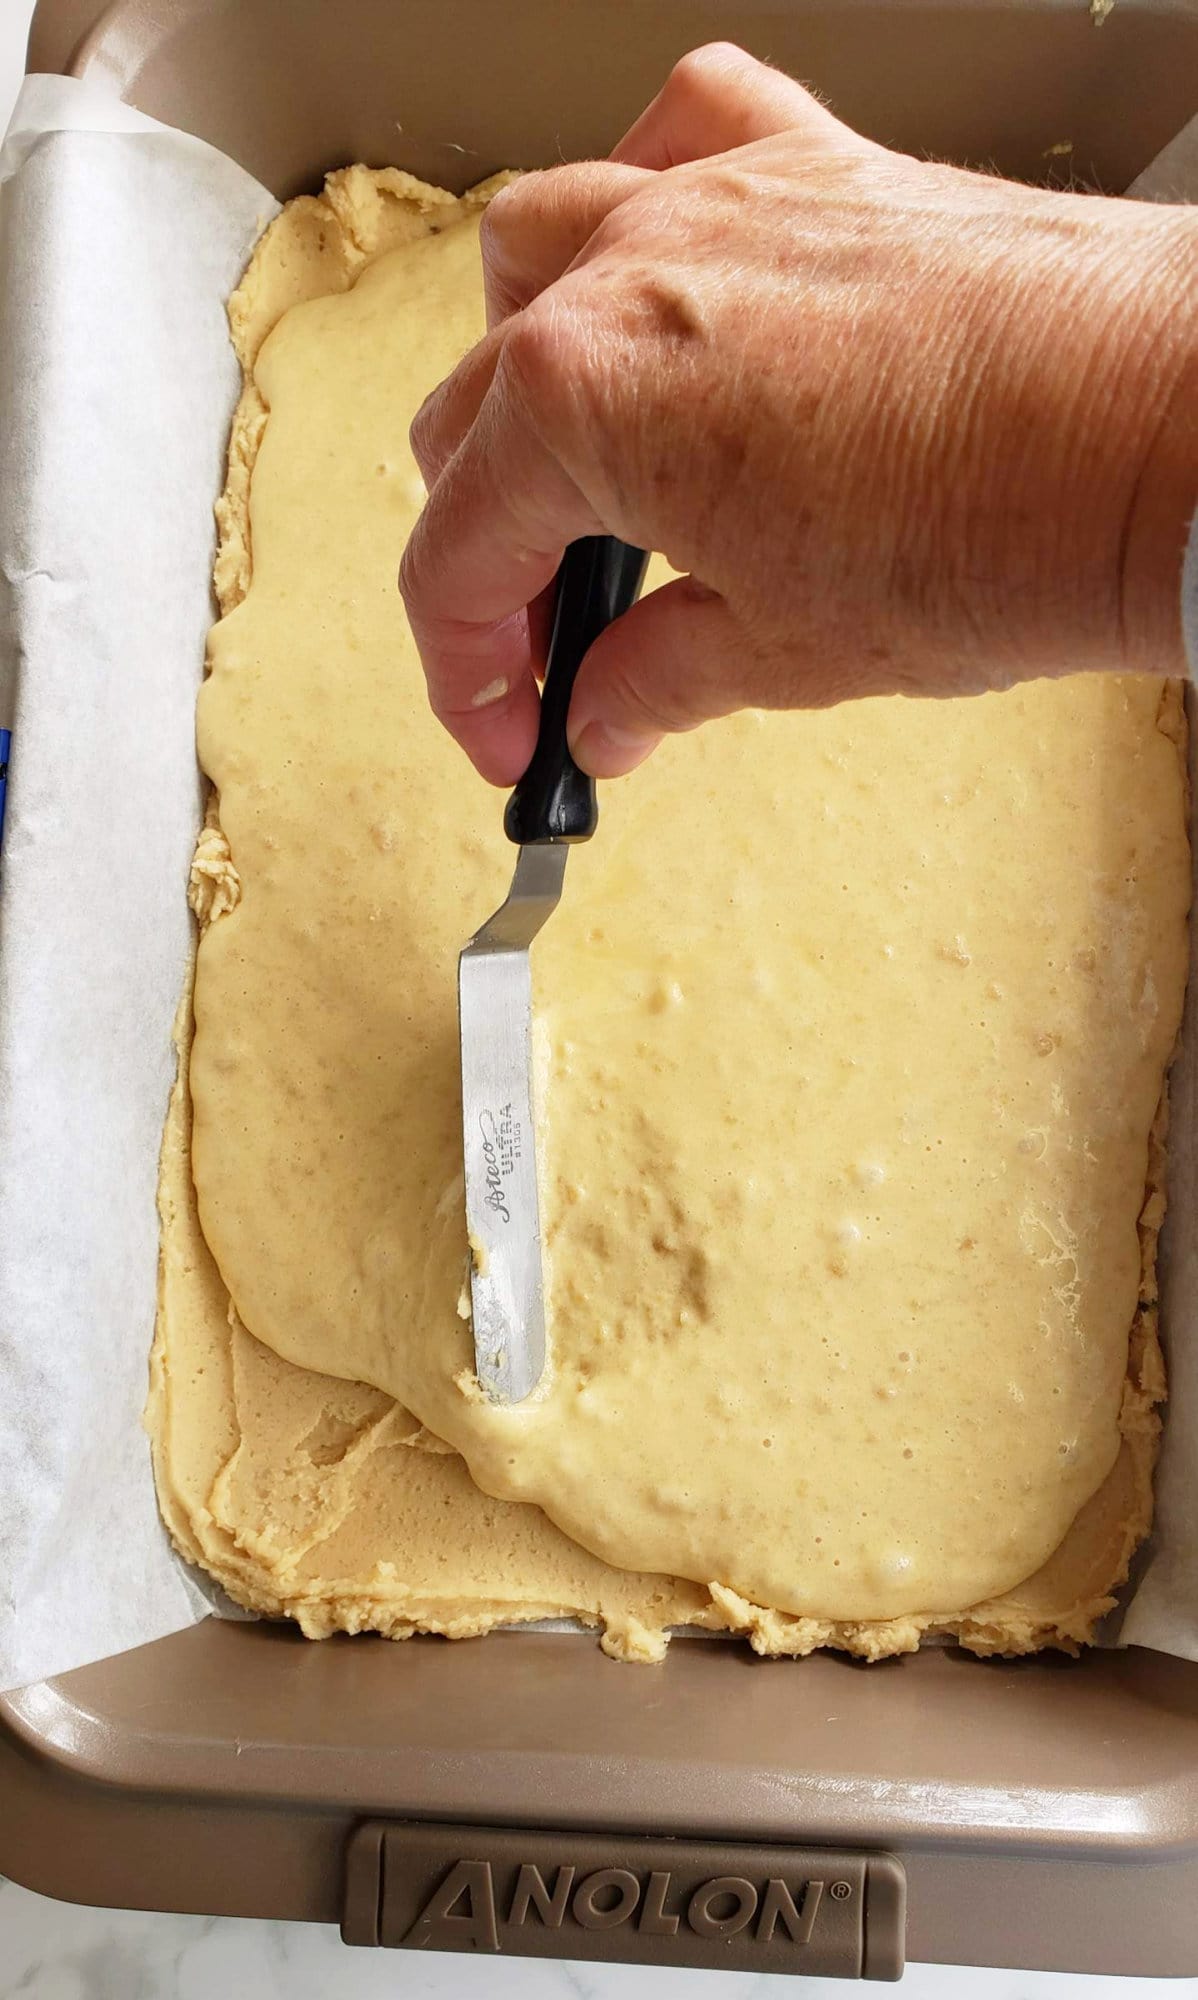 Hand holding offset spatula spreads filling over prepared crust